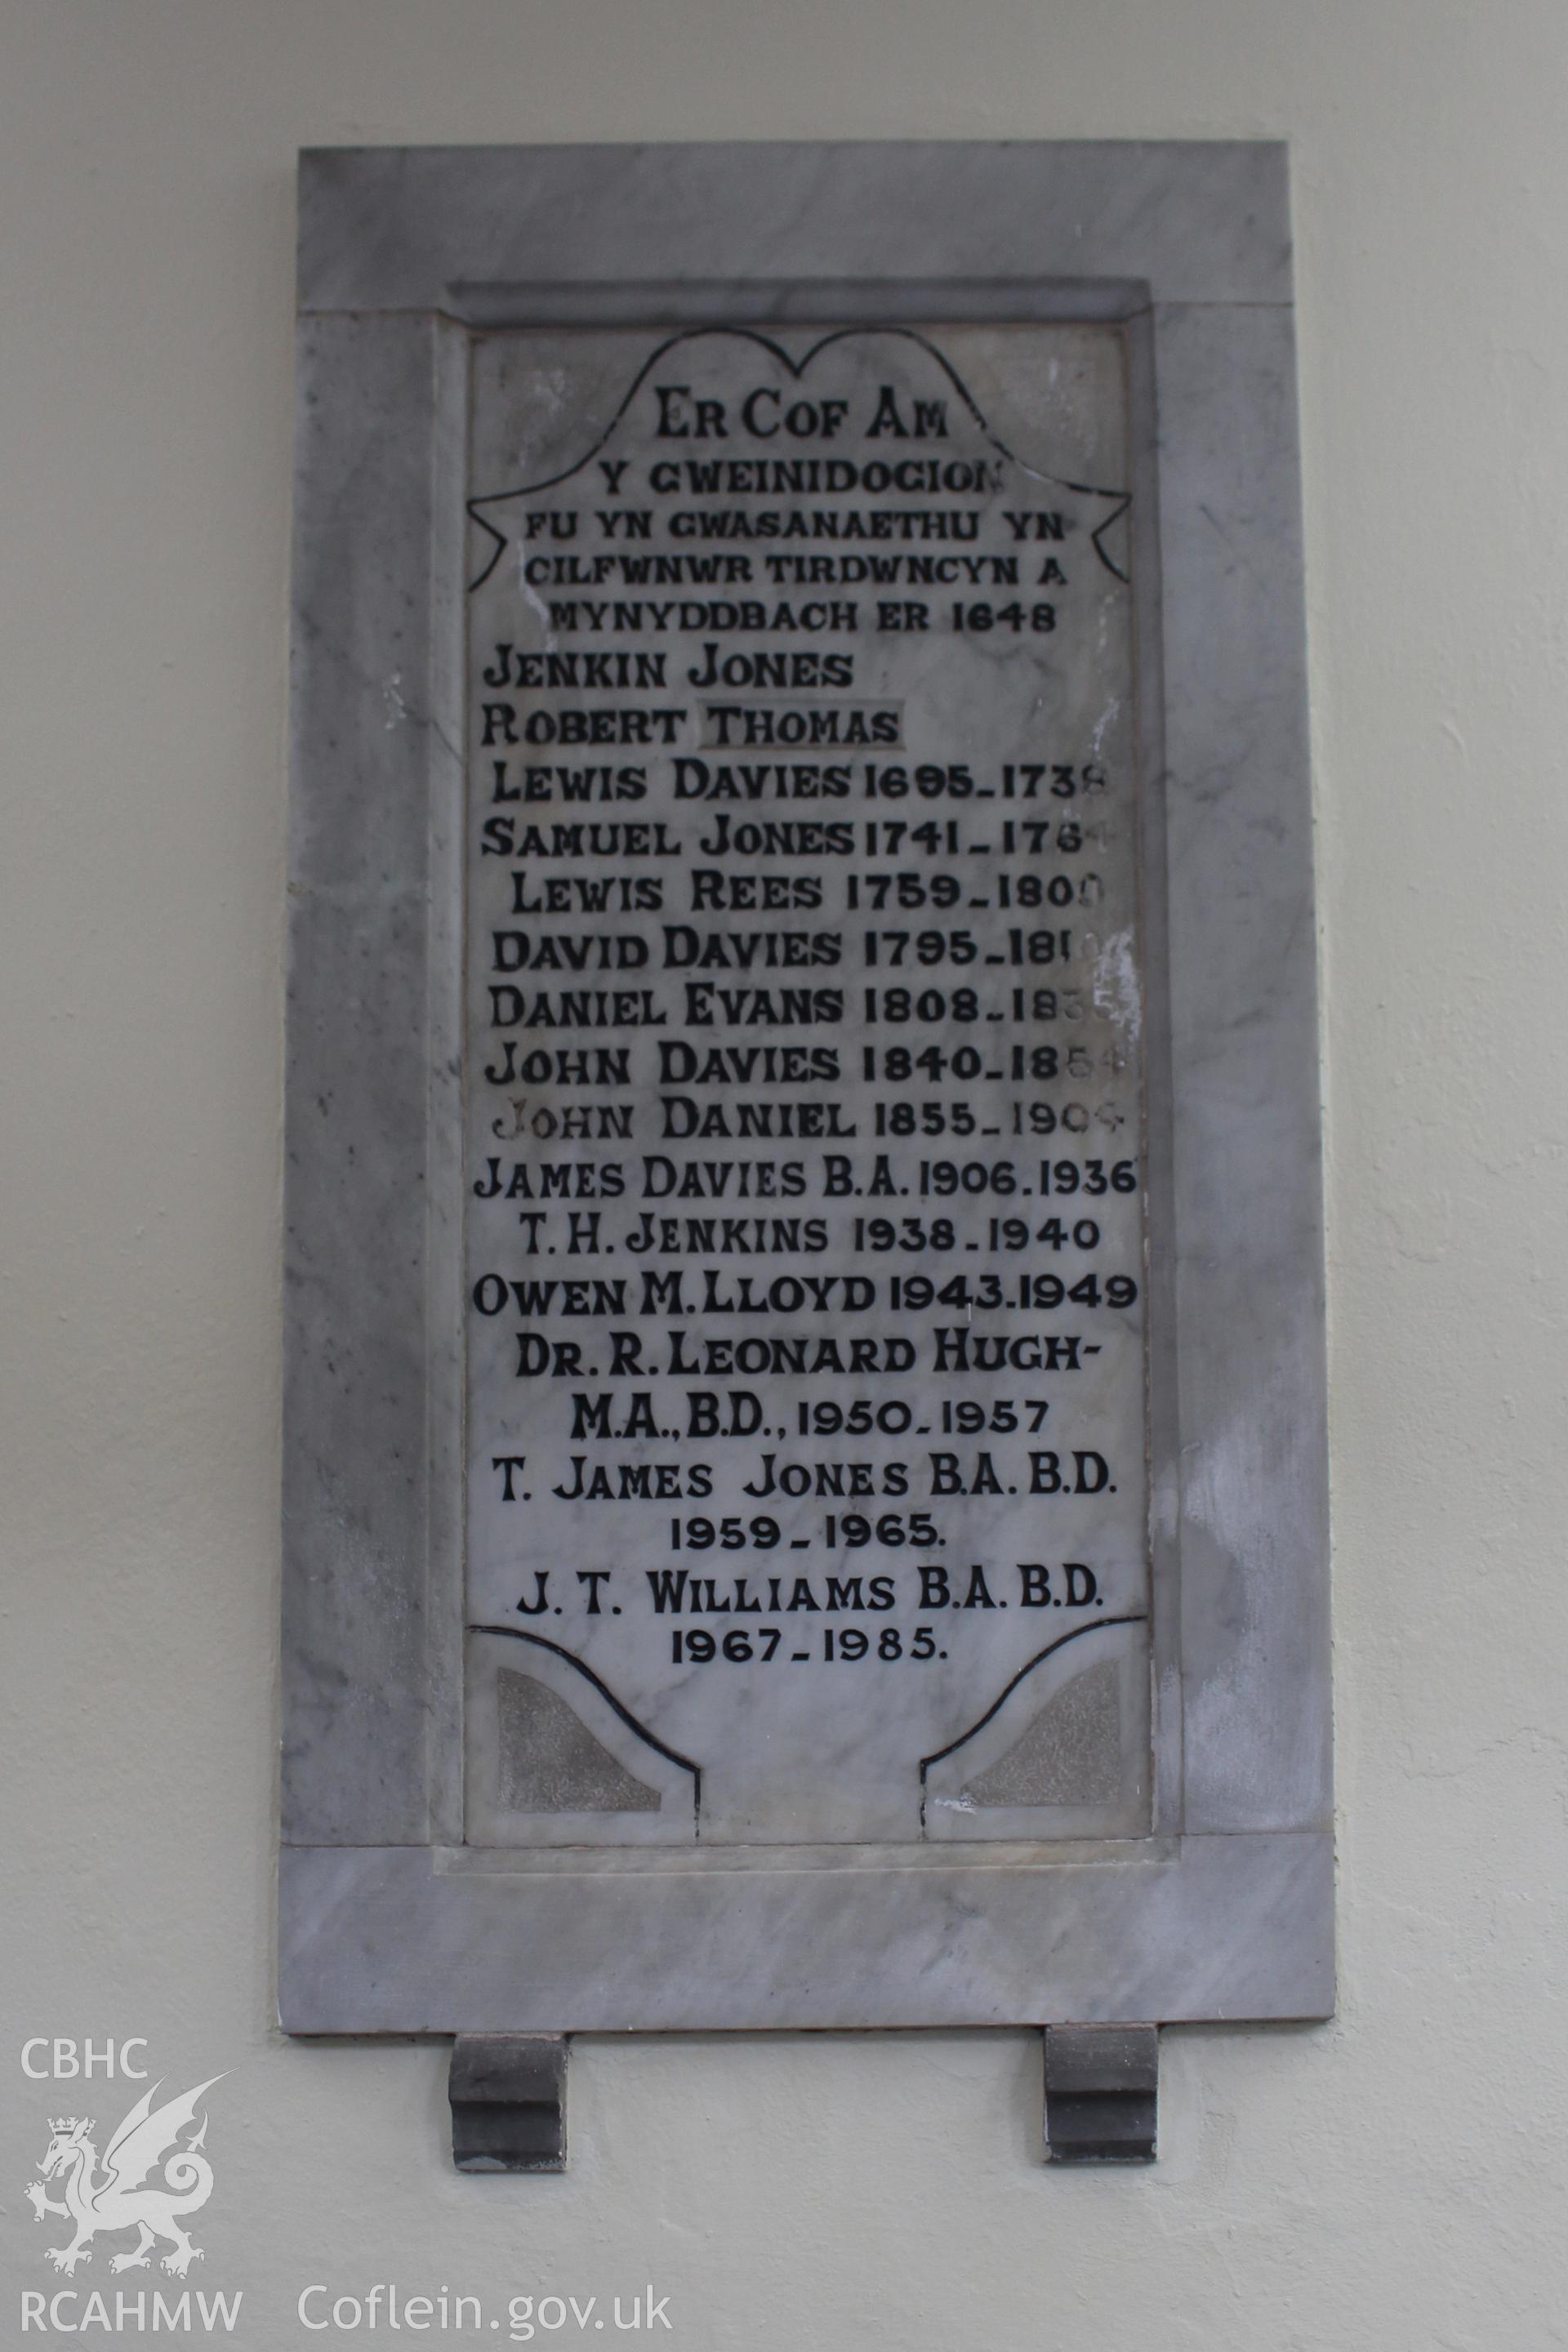 Colour photograph showing detail of memorial stone dedicated to former ministers dating from 1648 to 1985 of Mynydd Bach Independent Chapel. Taken during photographic survey conducted by Sue Fielding on 13th May 2017.